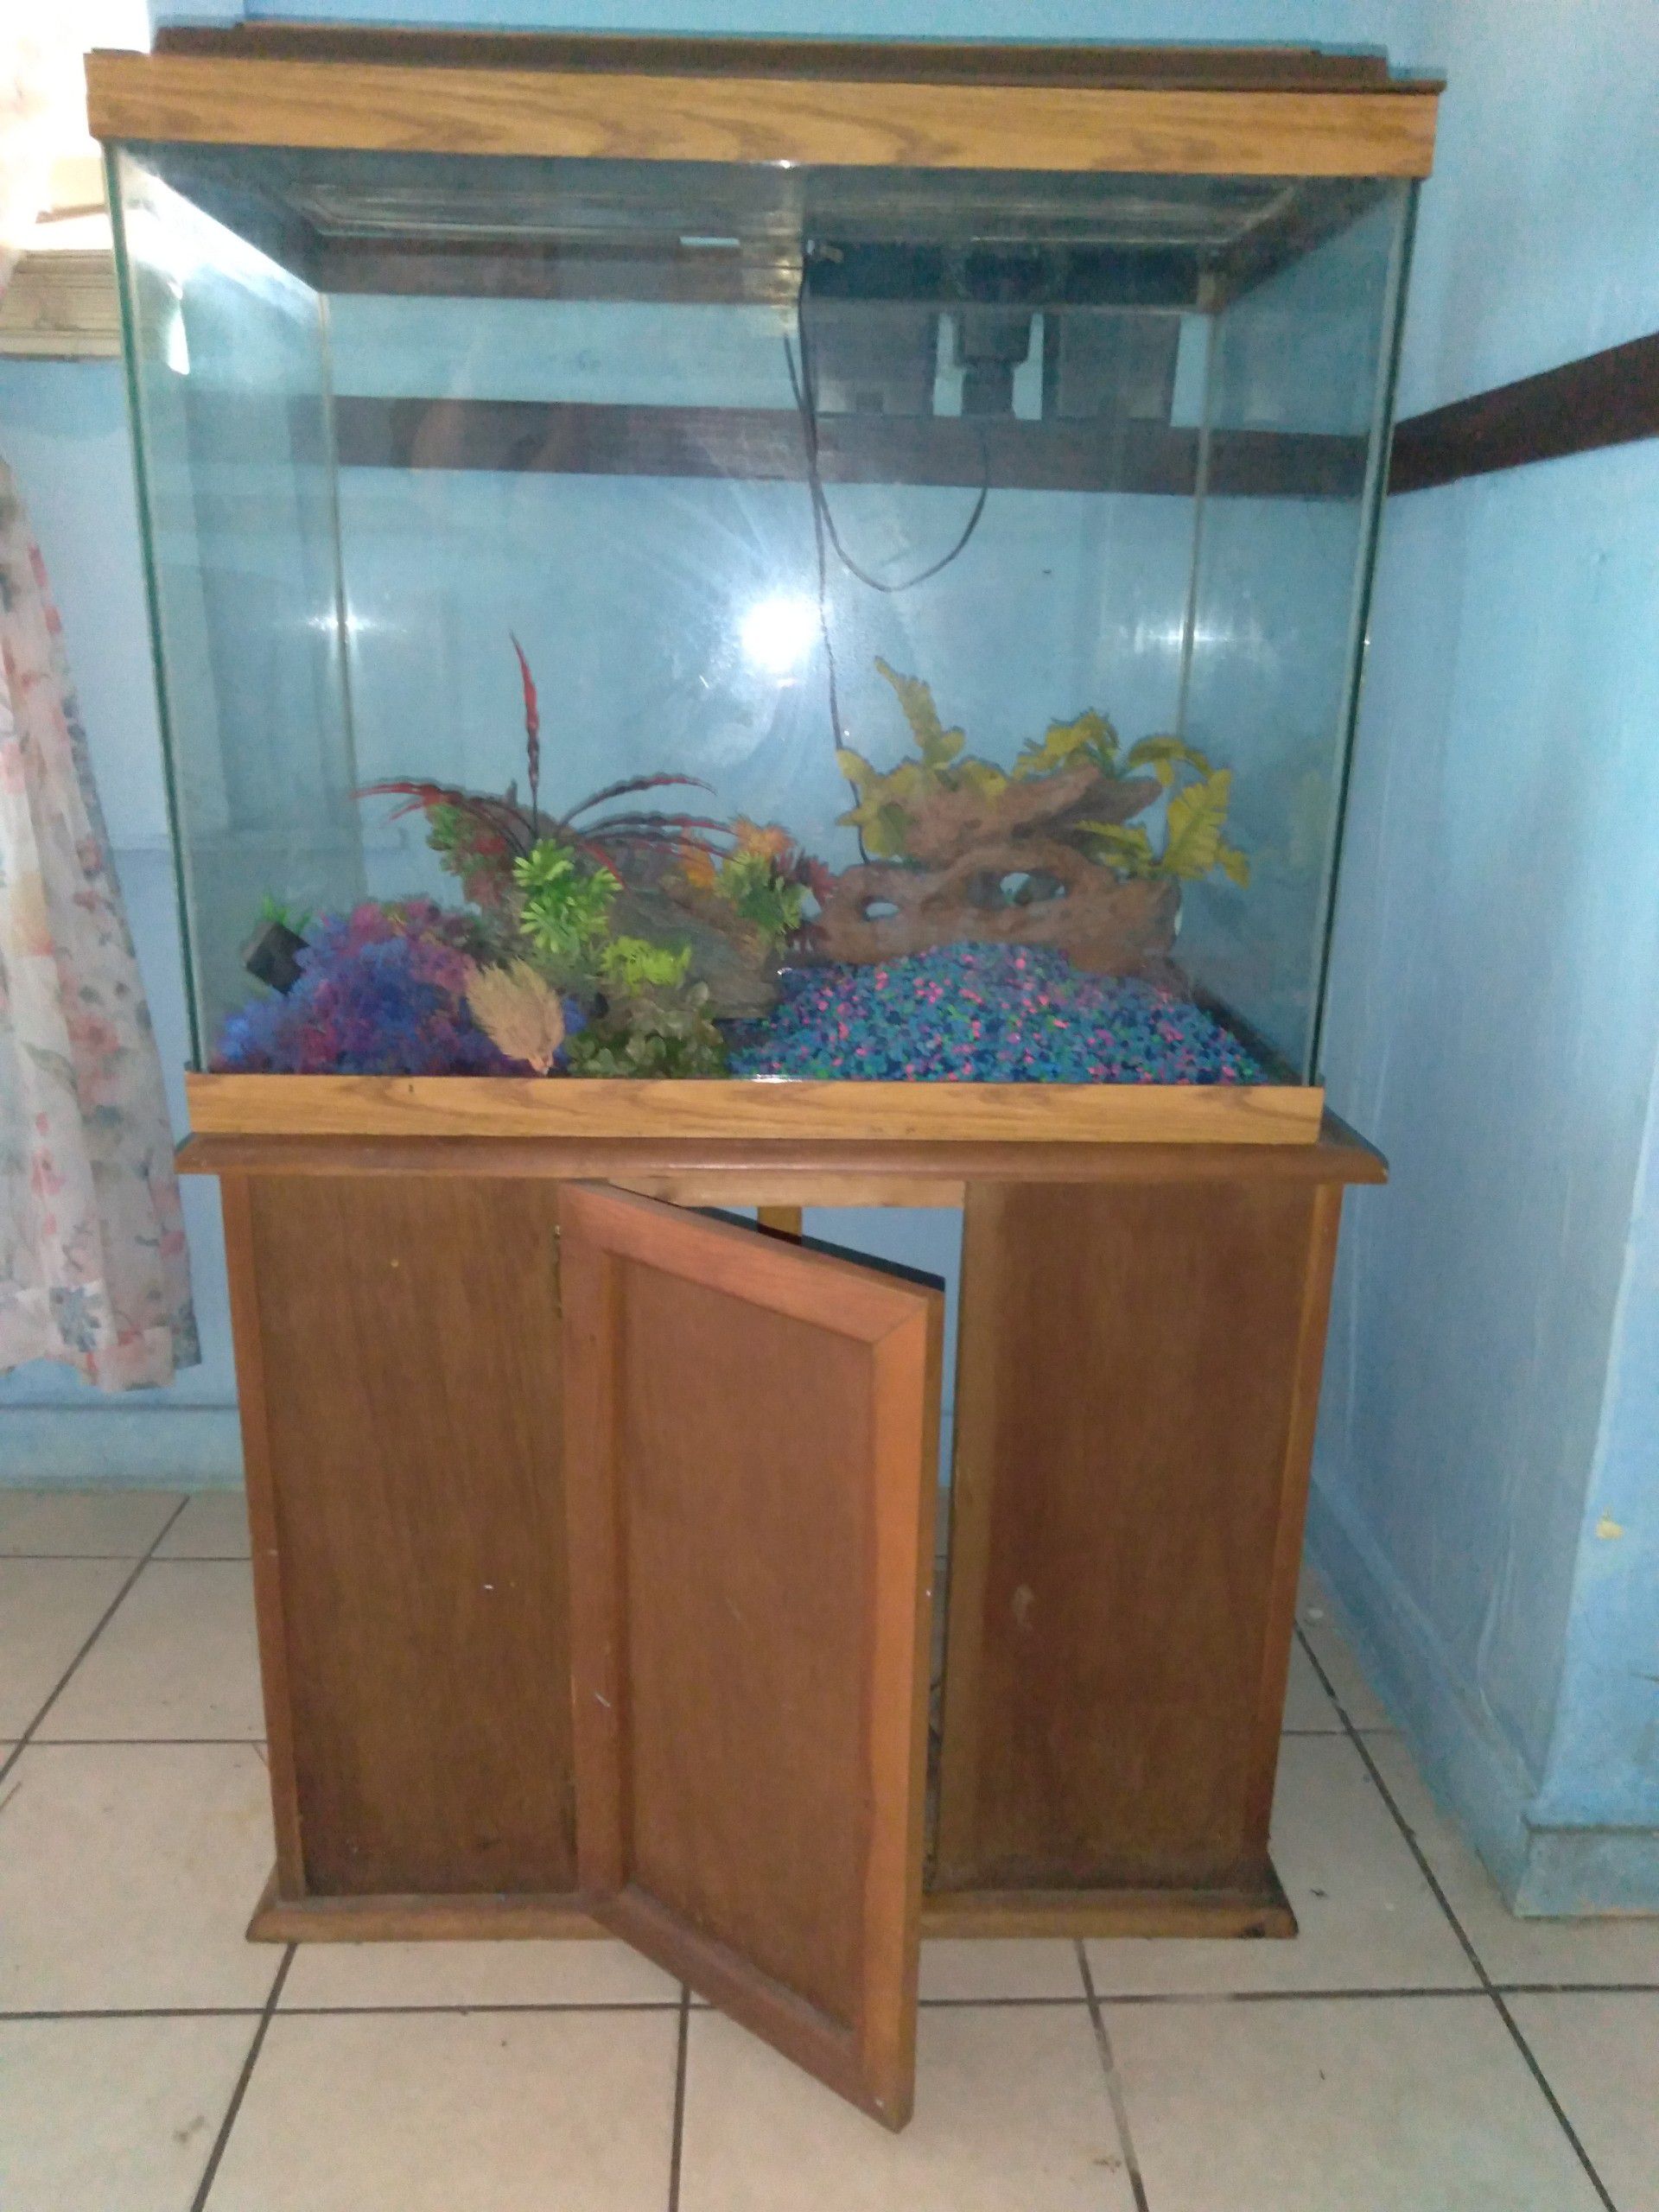 60 gallon fish tank with stand and storage